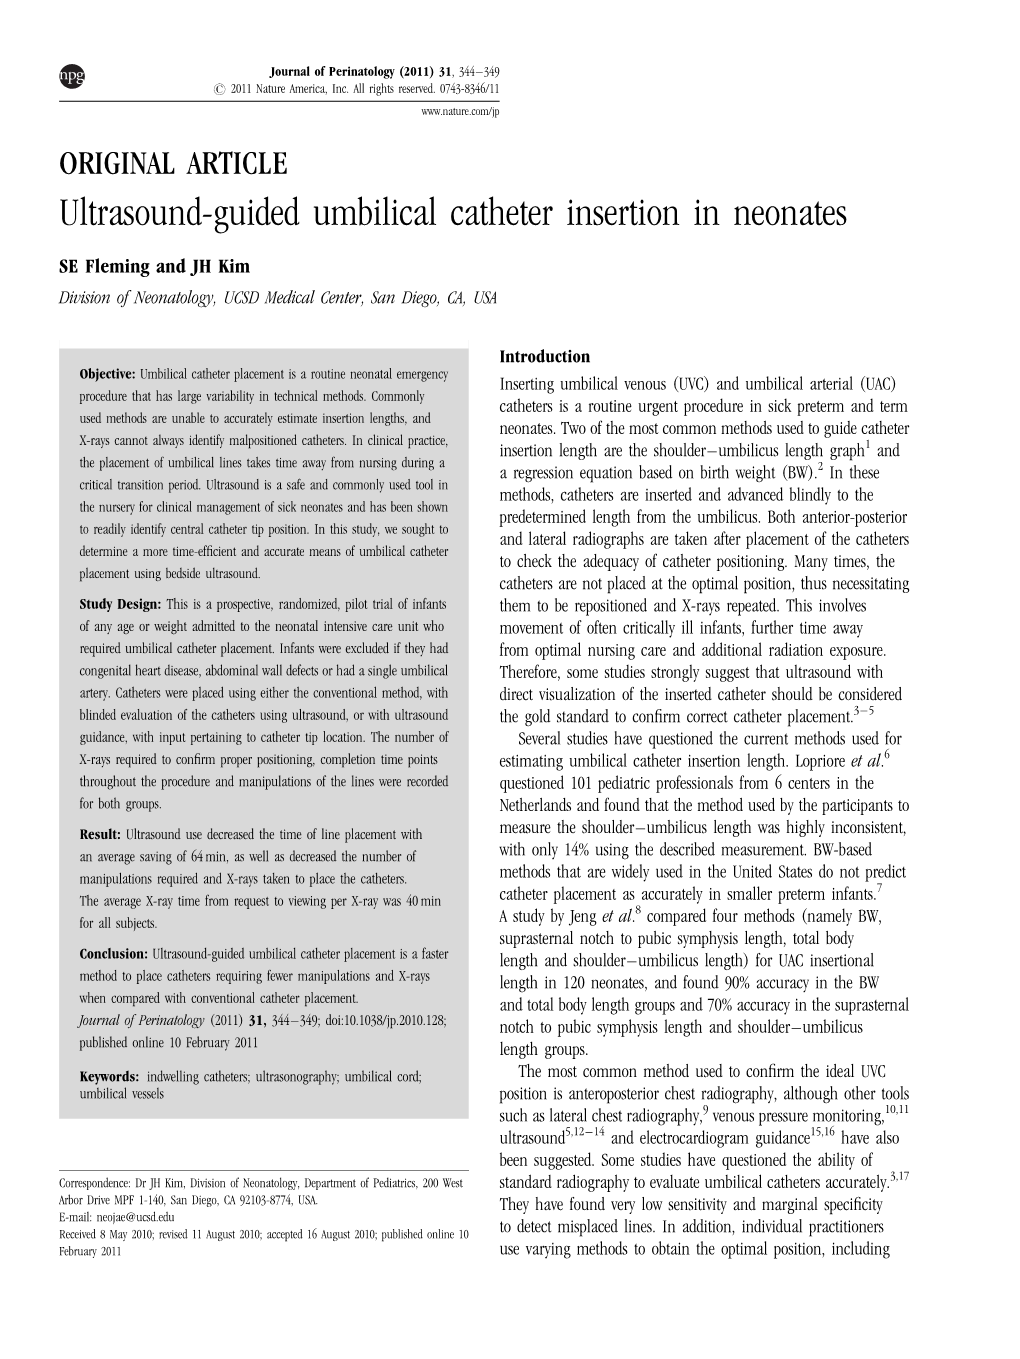 Ultrasound-Guided Umbilical Catheter Insertion in Neonates